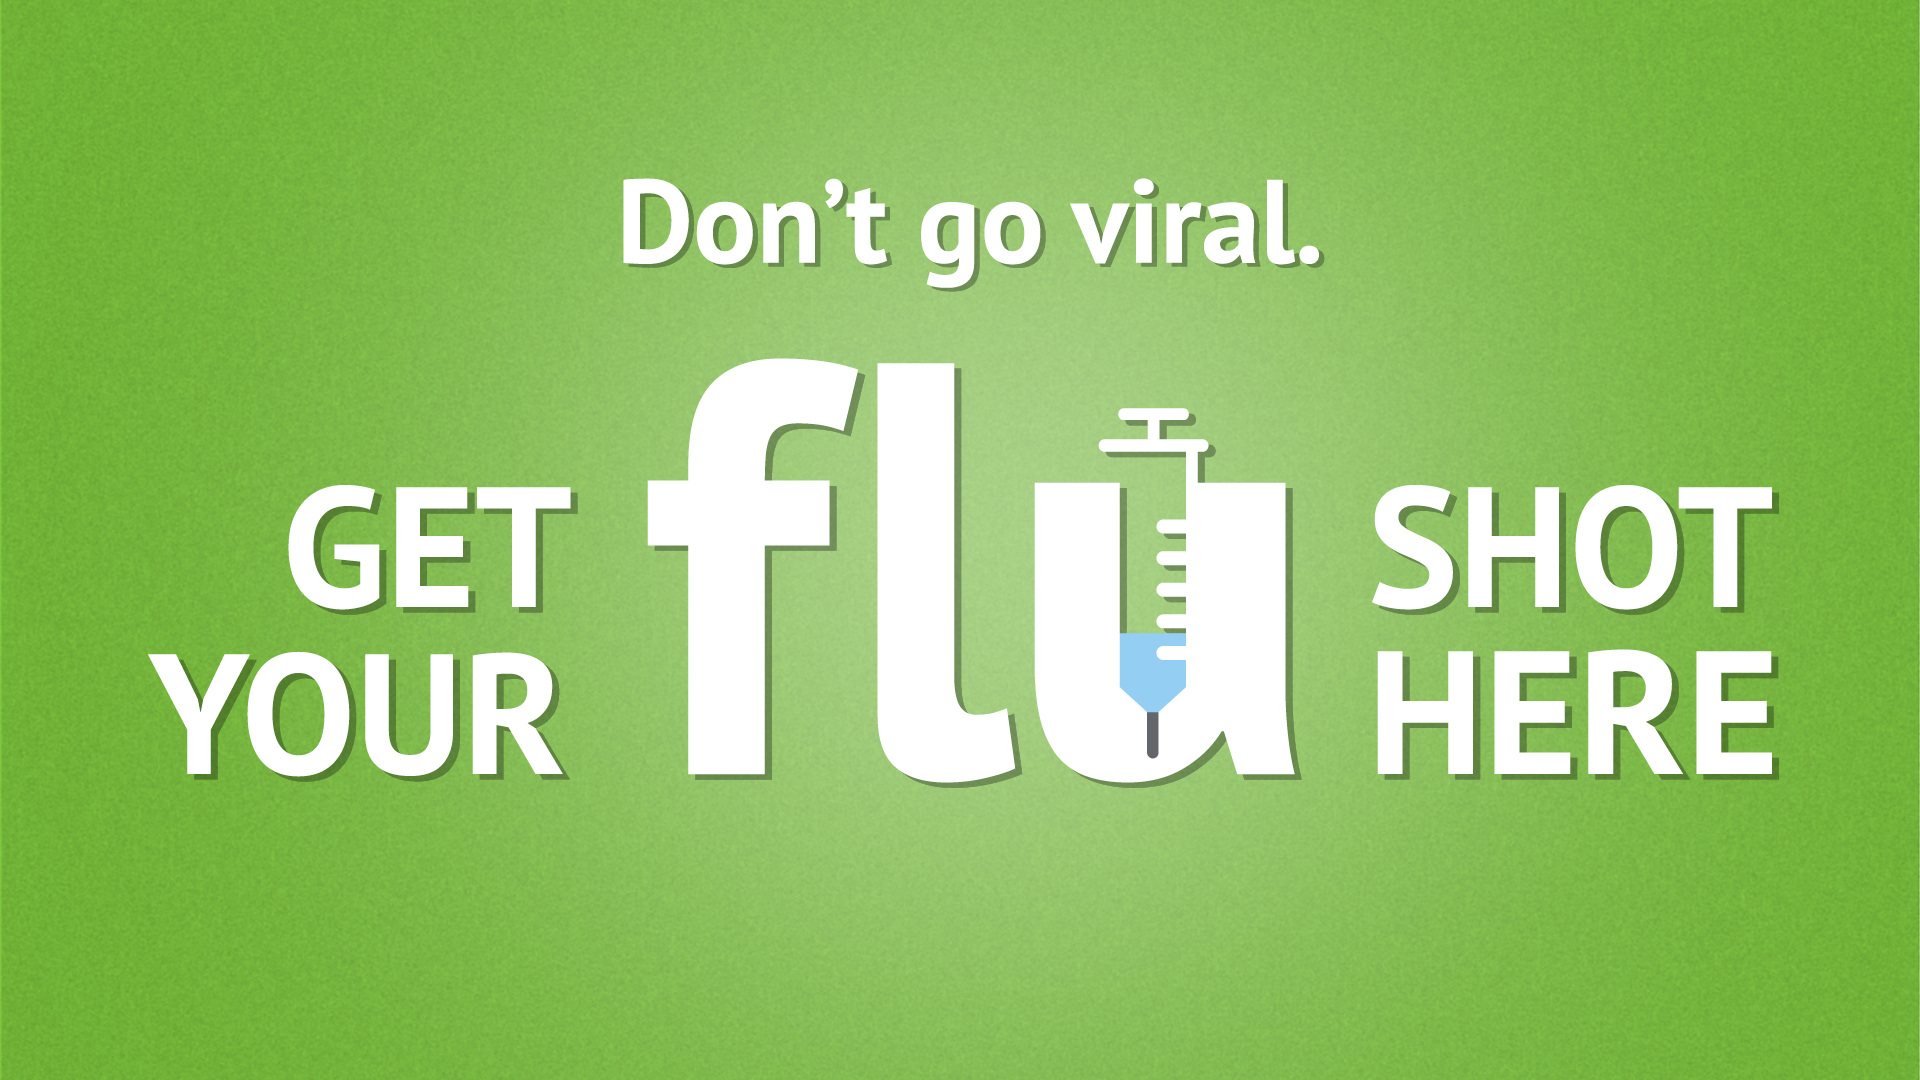 get your flushot at United Care Specialty pharmacy - Remedy's RX